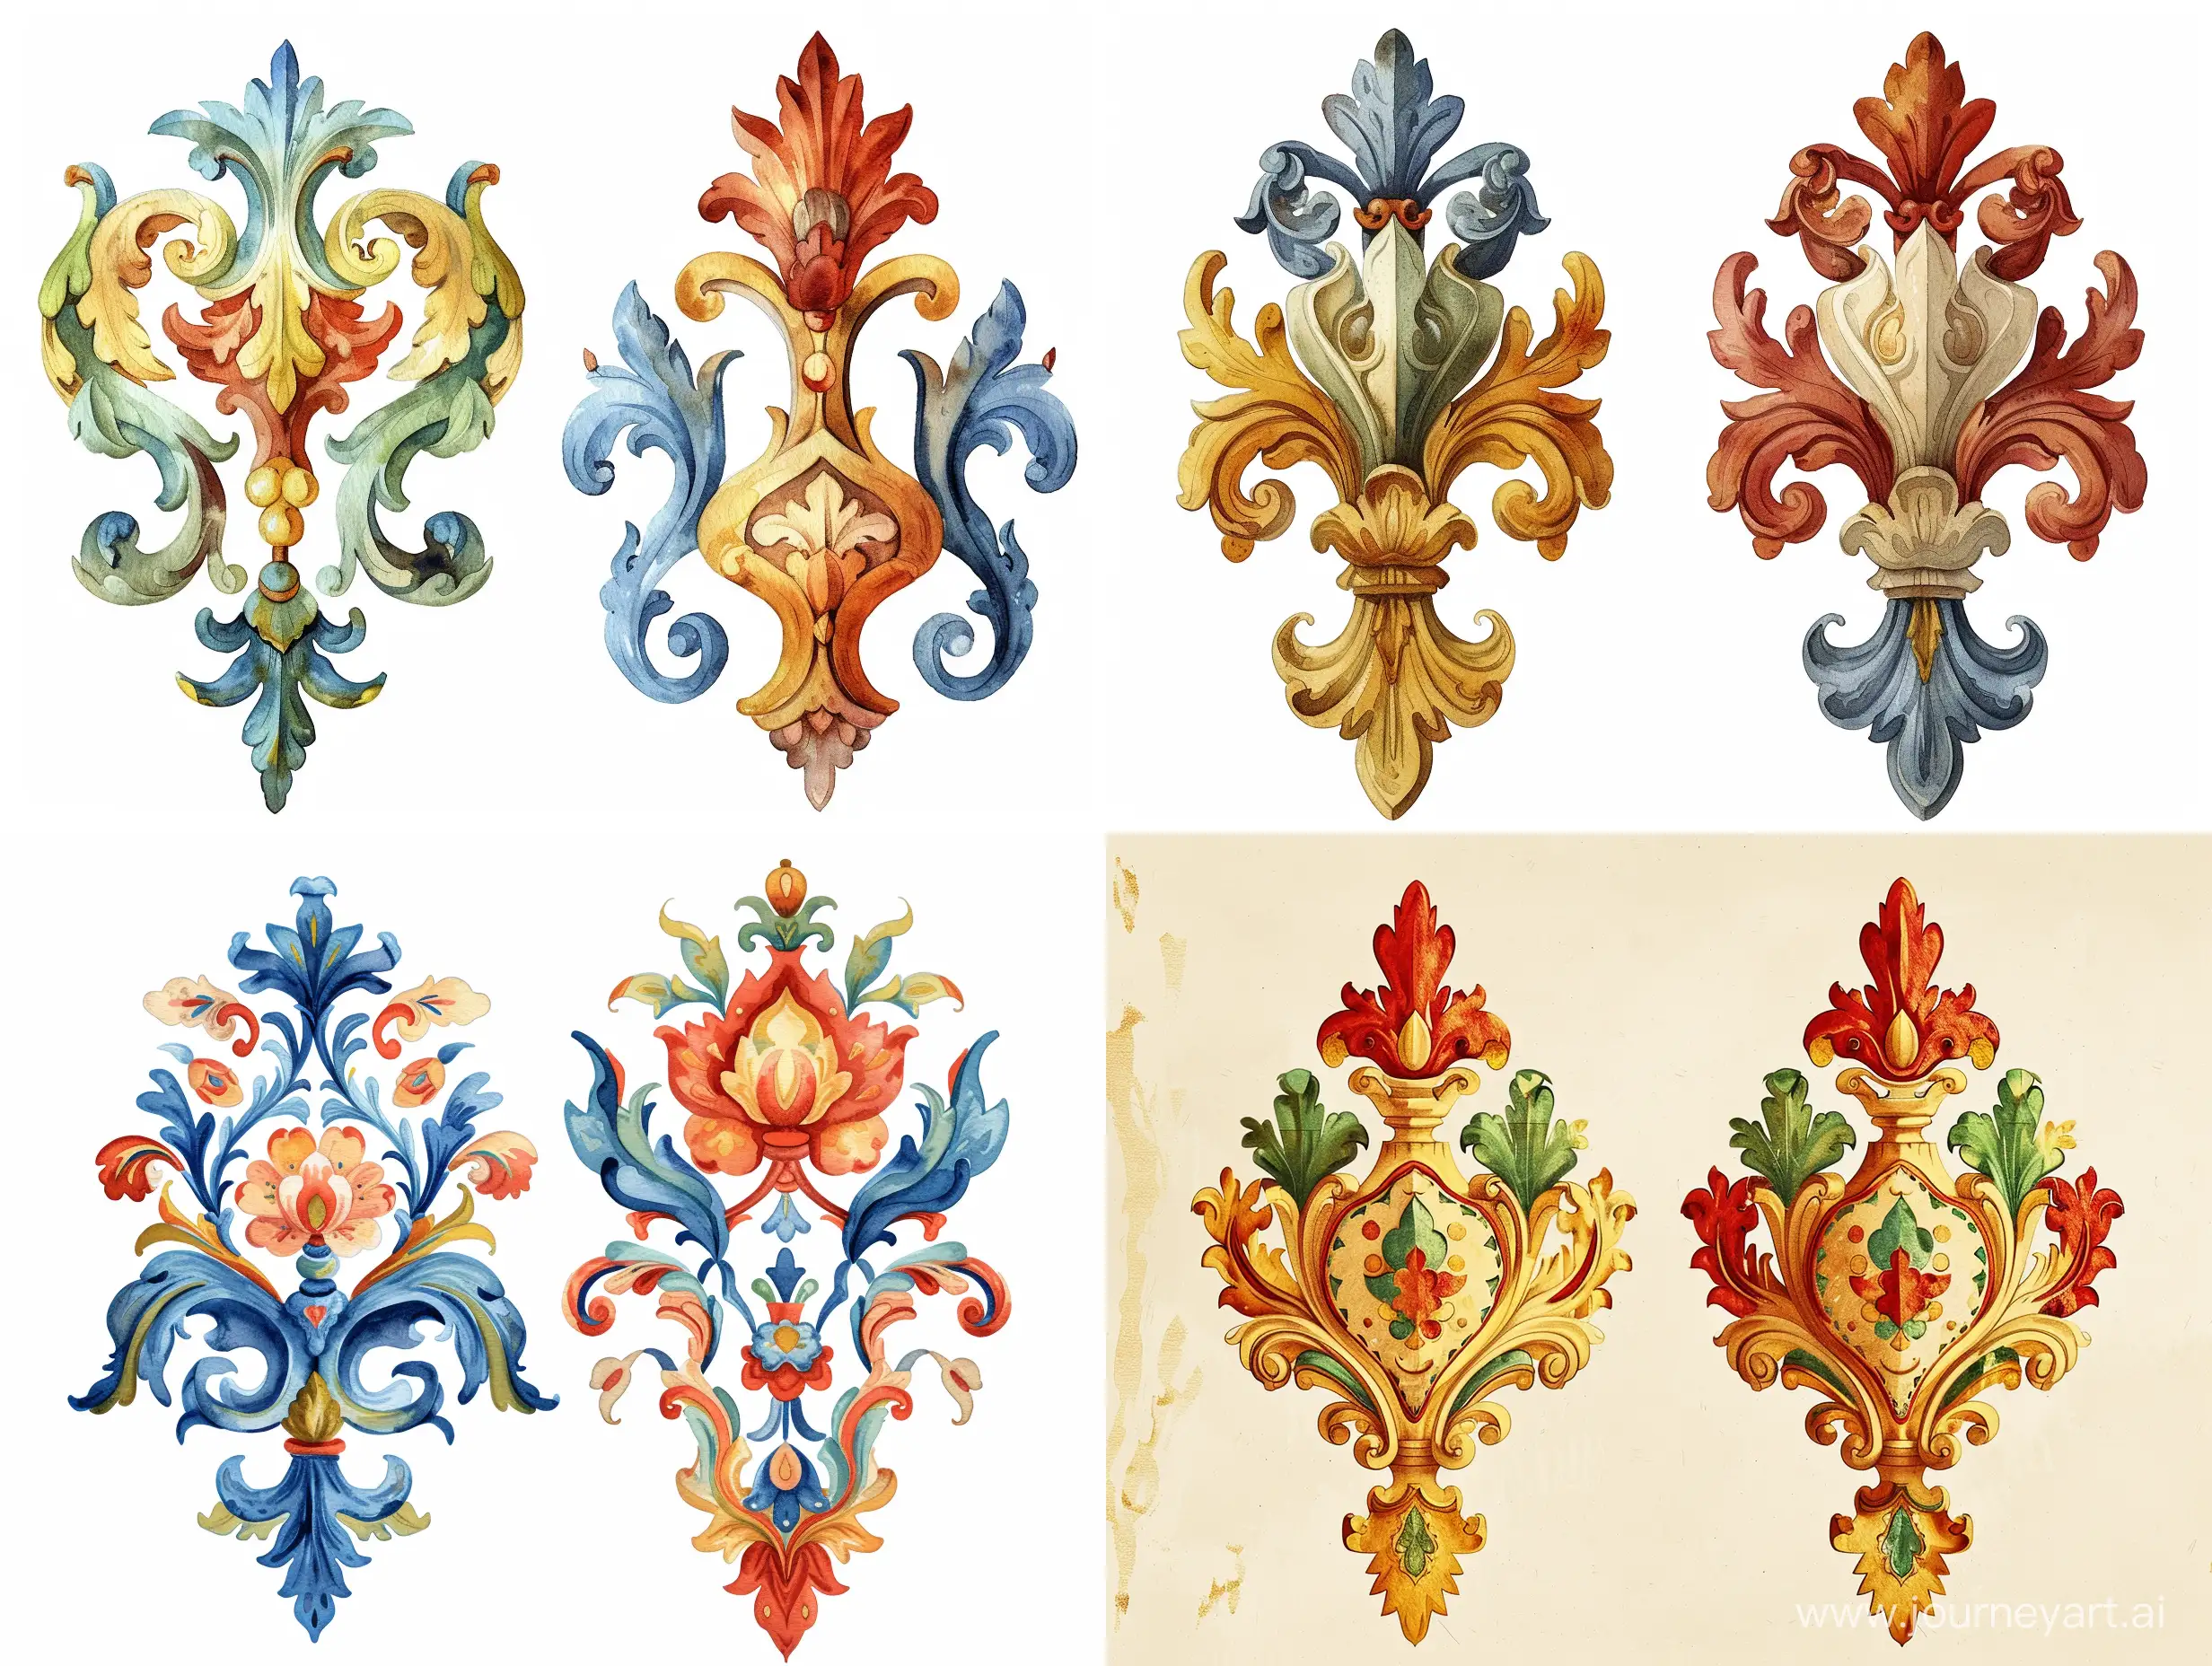 two variants of the ornament of the Renaissance king, with the possibility of vertical reflection, decorative, watercolor, flat illustration